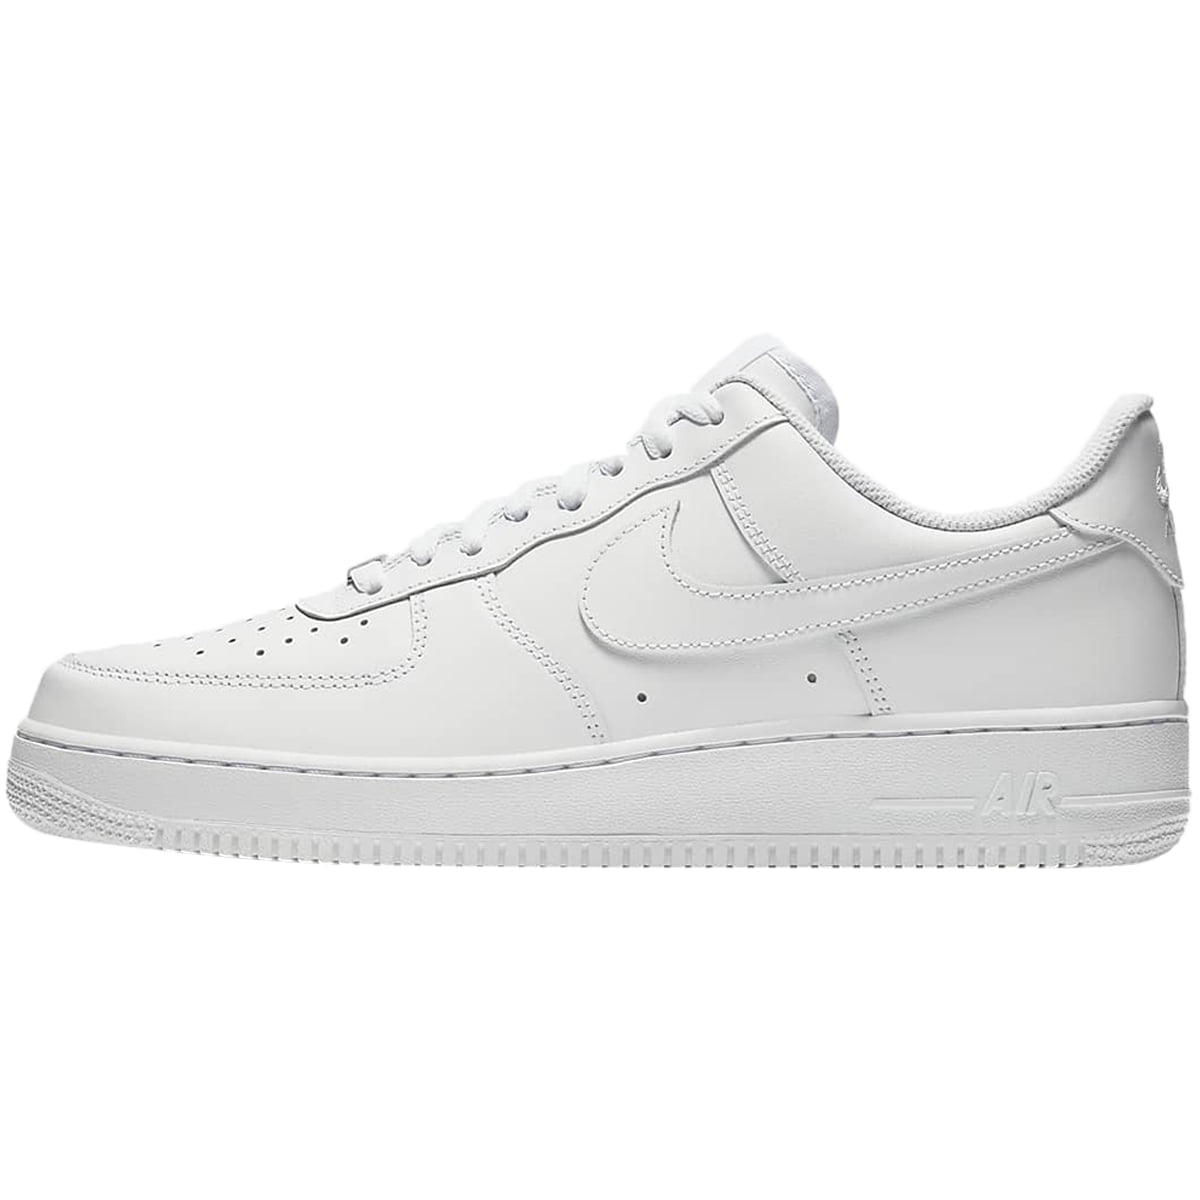 walmart knock off air force ones